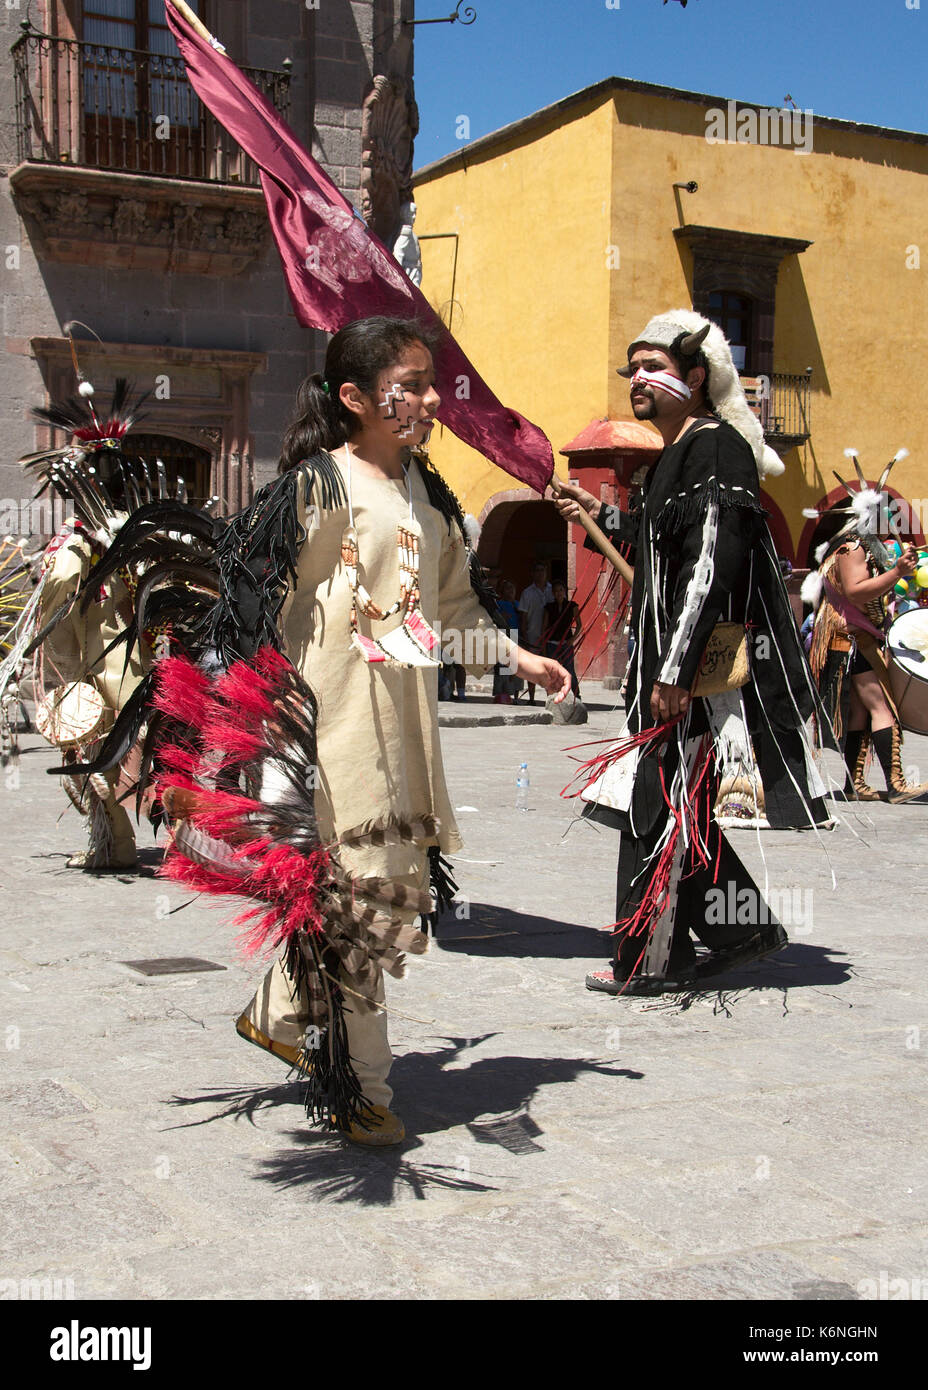 San Miguel de Allende, Guanajuato, Mexico - 2013: People perfom a traditional dance at the town's zocalo Stock Photo